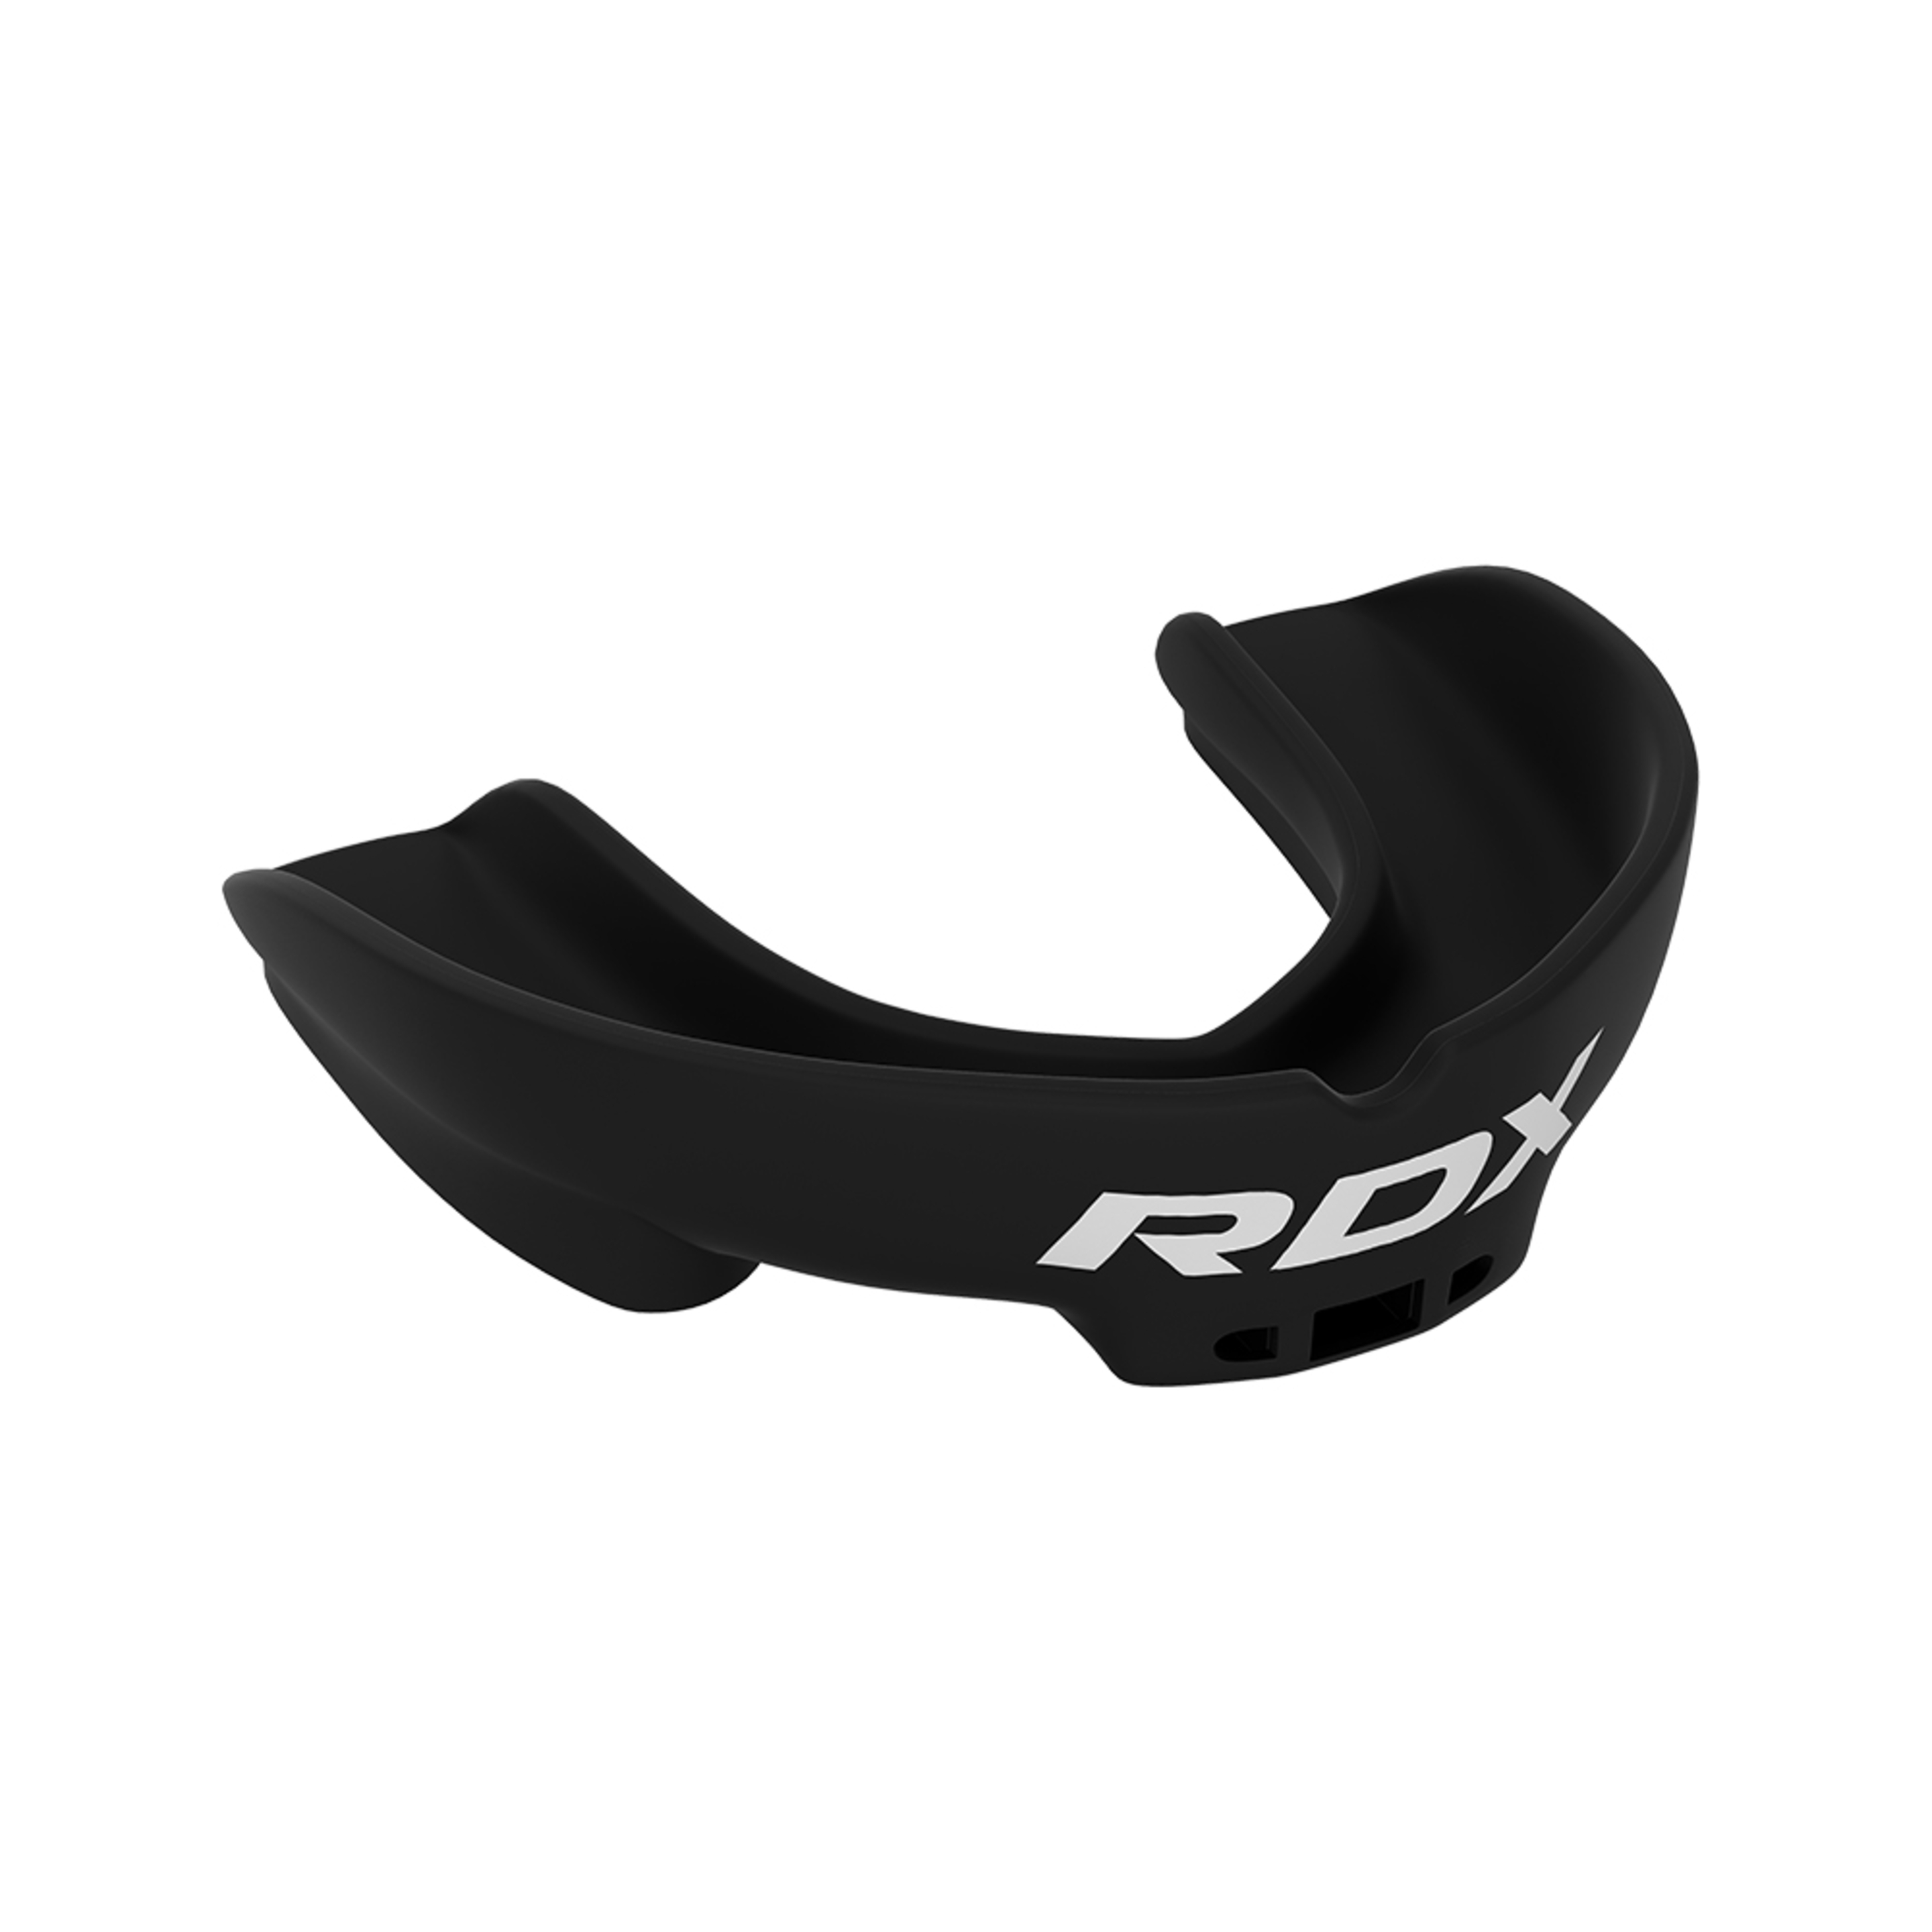 Protectores Bucales Rdx Ggs-3